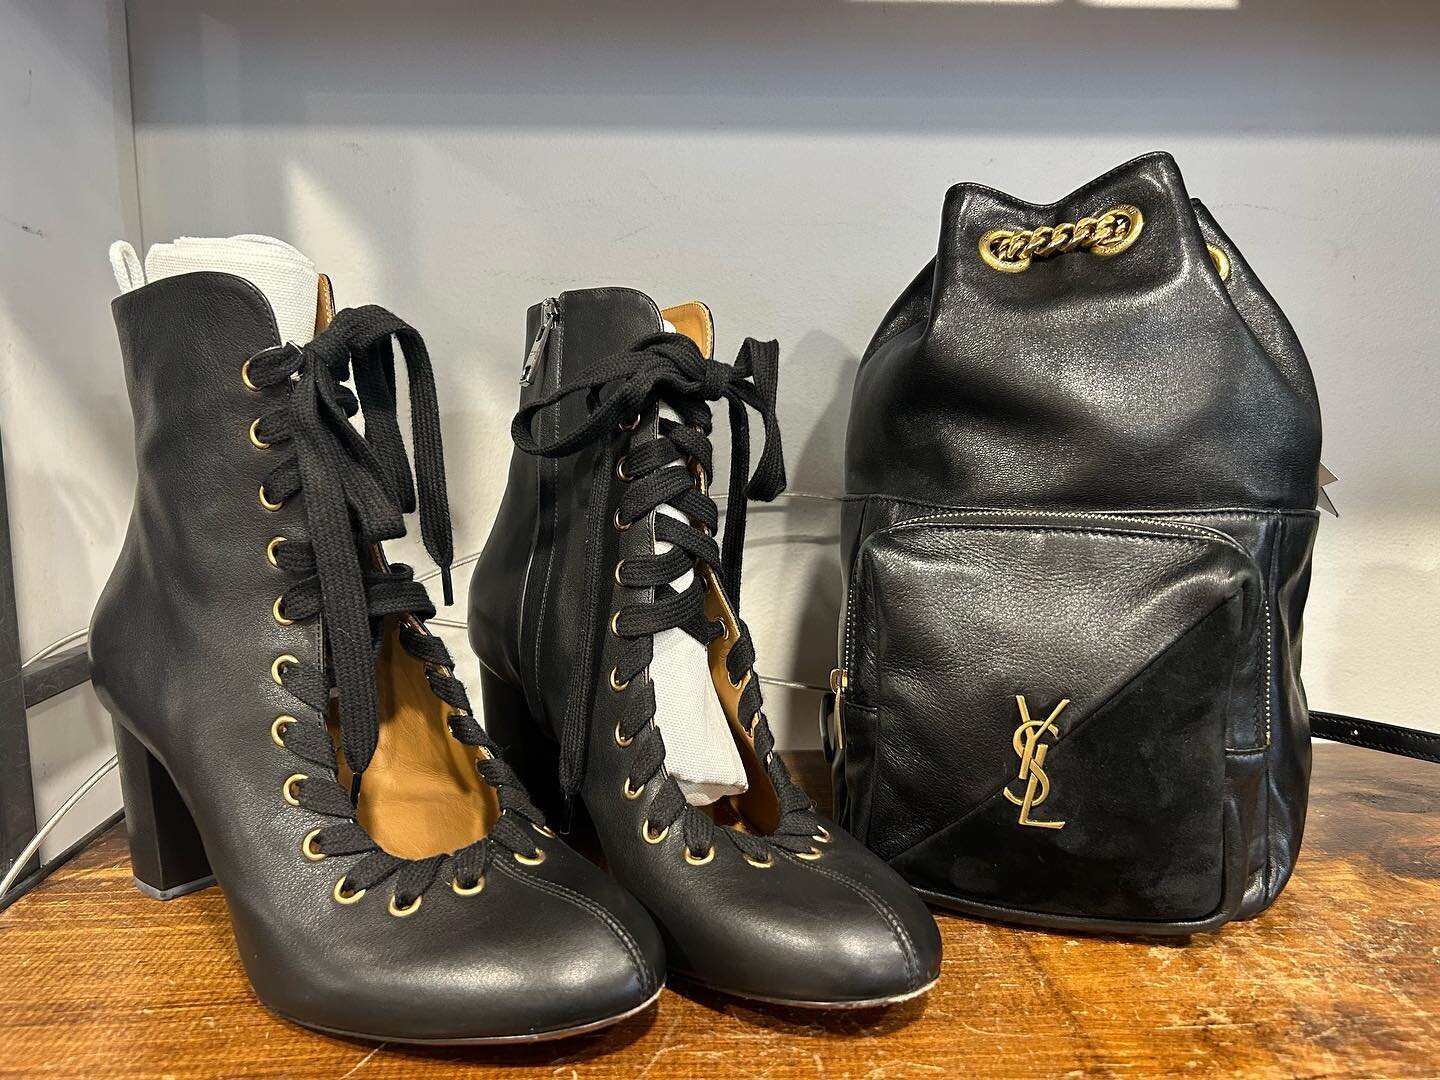 Loving this leather backpack paired with these Italian leather heeled booties ❤️❤️ 

The bag is priced at $1,800.95 👜

The shoes are a size 39.5 priced at $225.95 👢

Come check them out in our store! 🥰

For inquiries, please call or email us at:
?